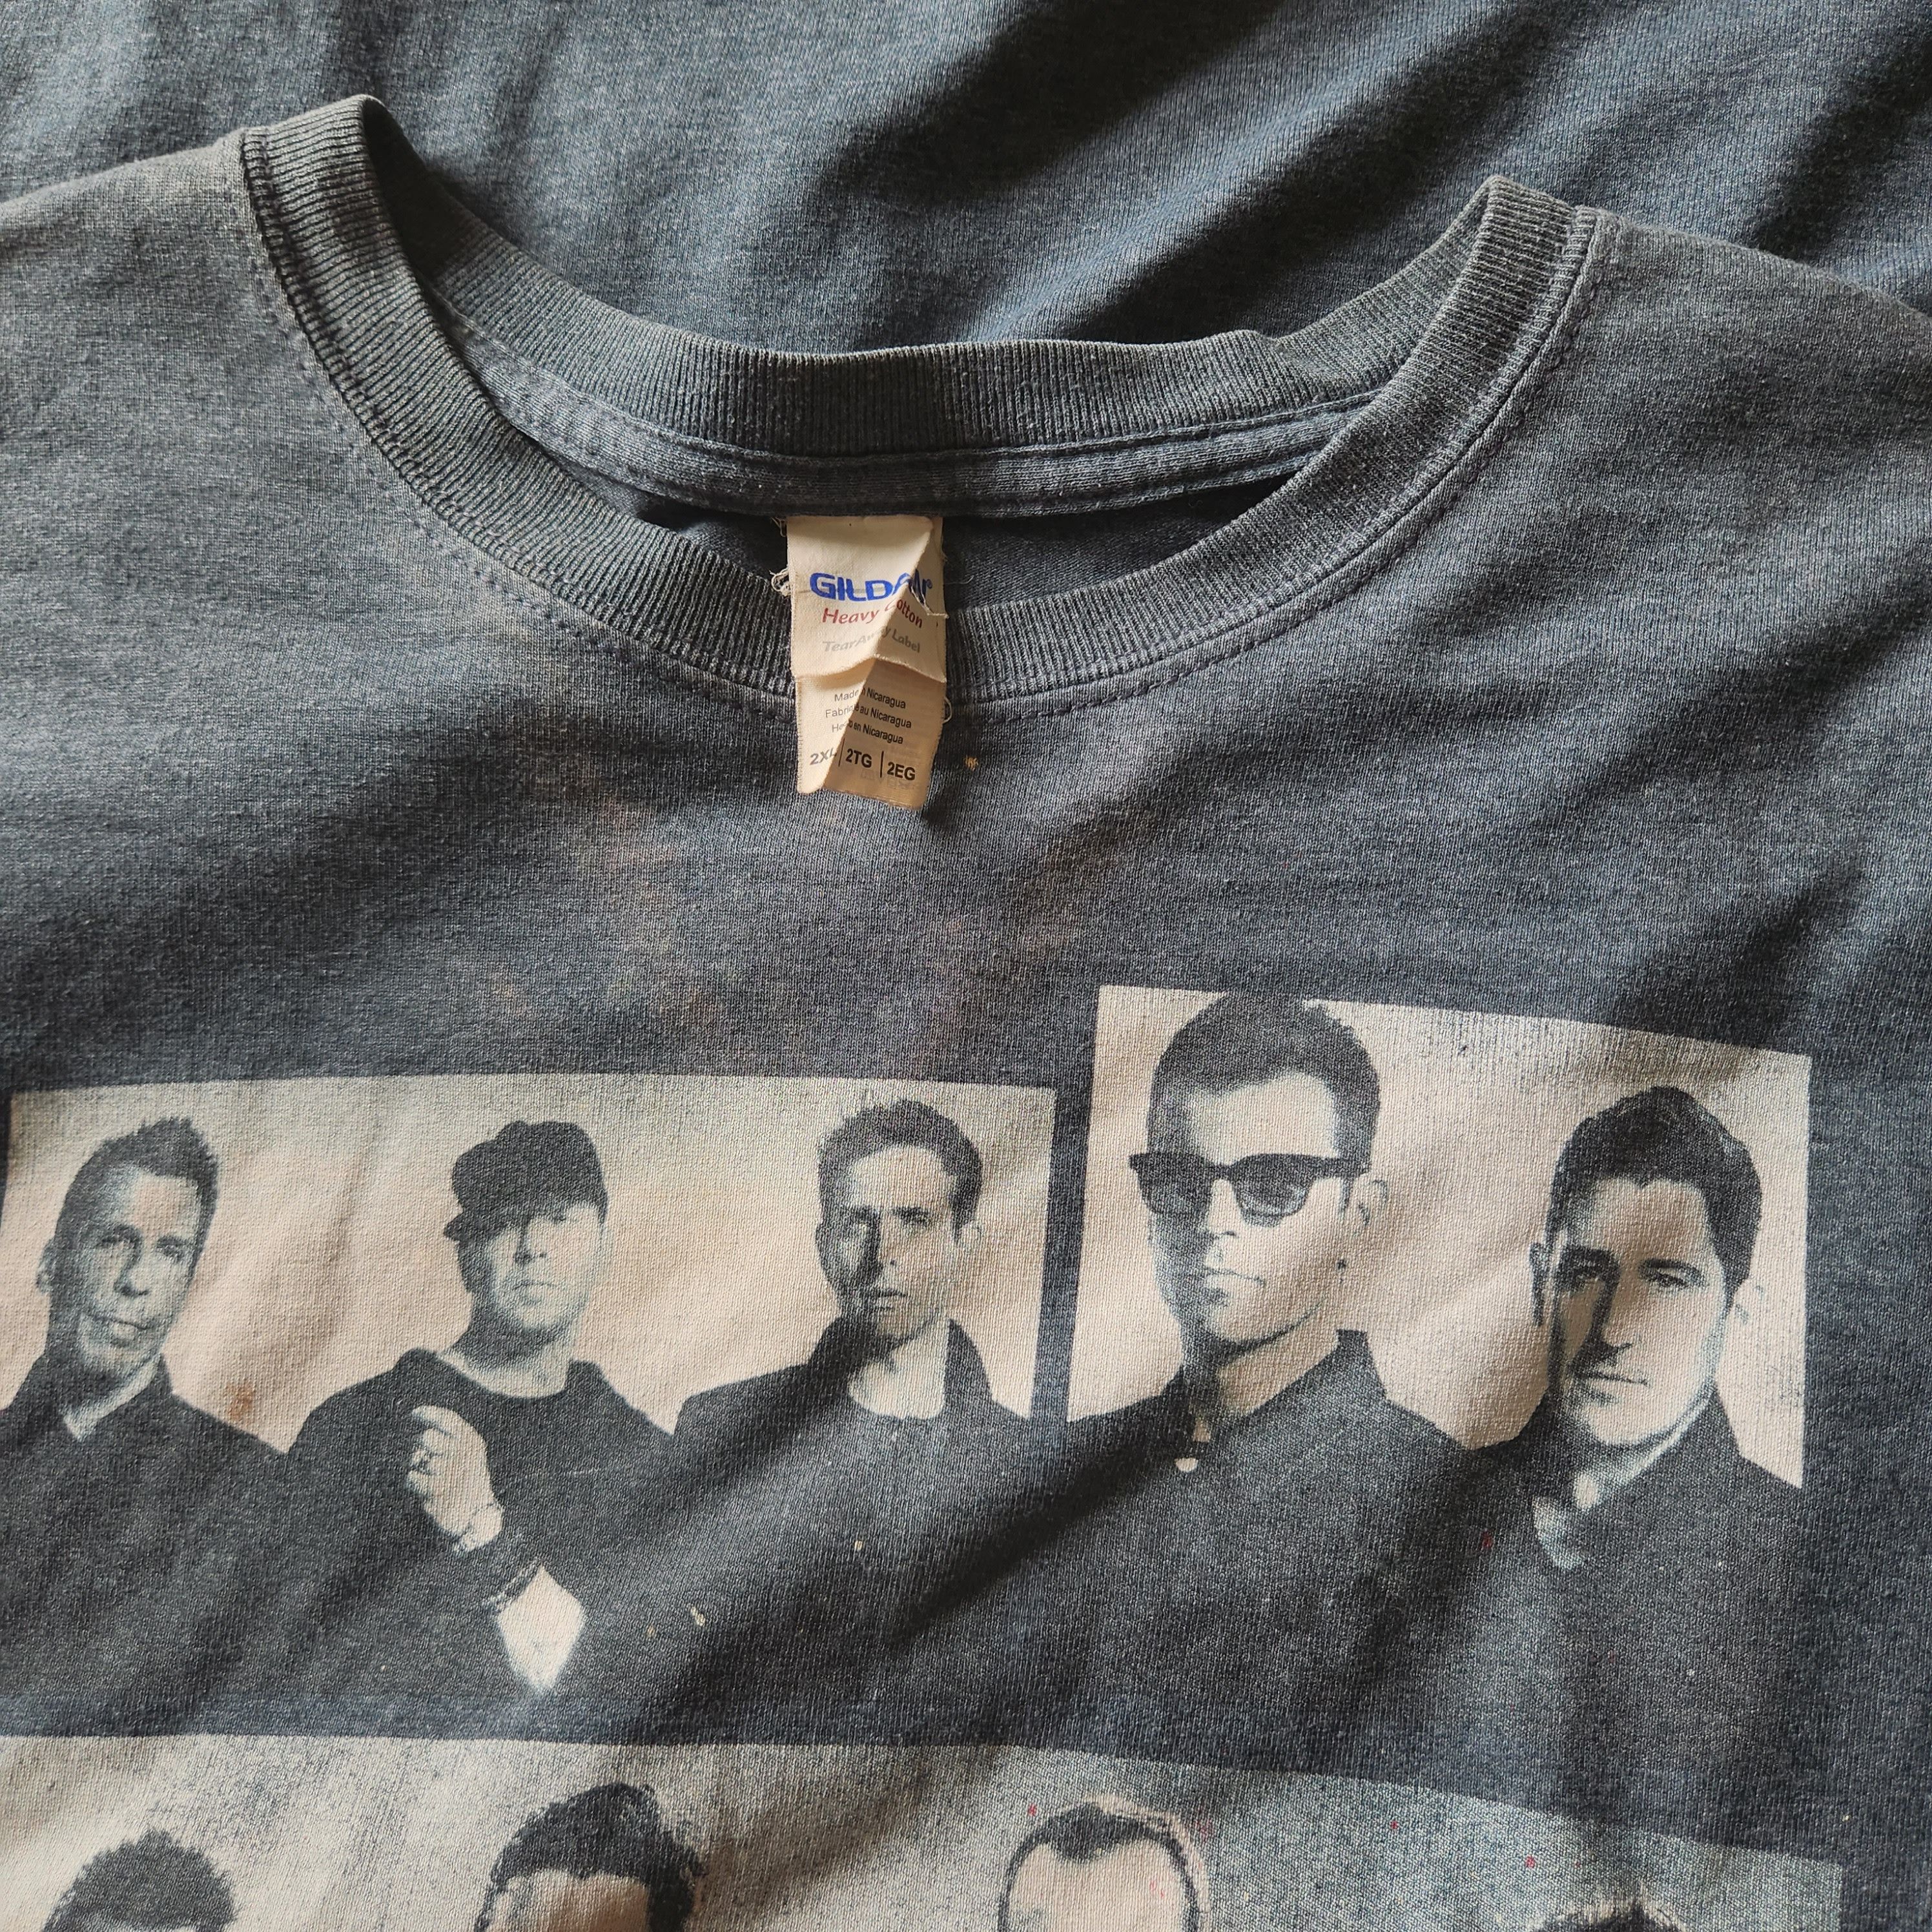 Band Tees - New Kids On The Block TShirt Copyright 2015 - 8